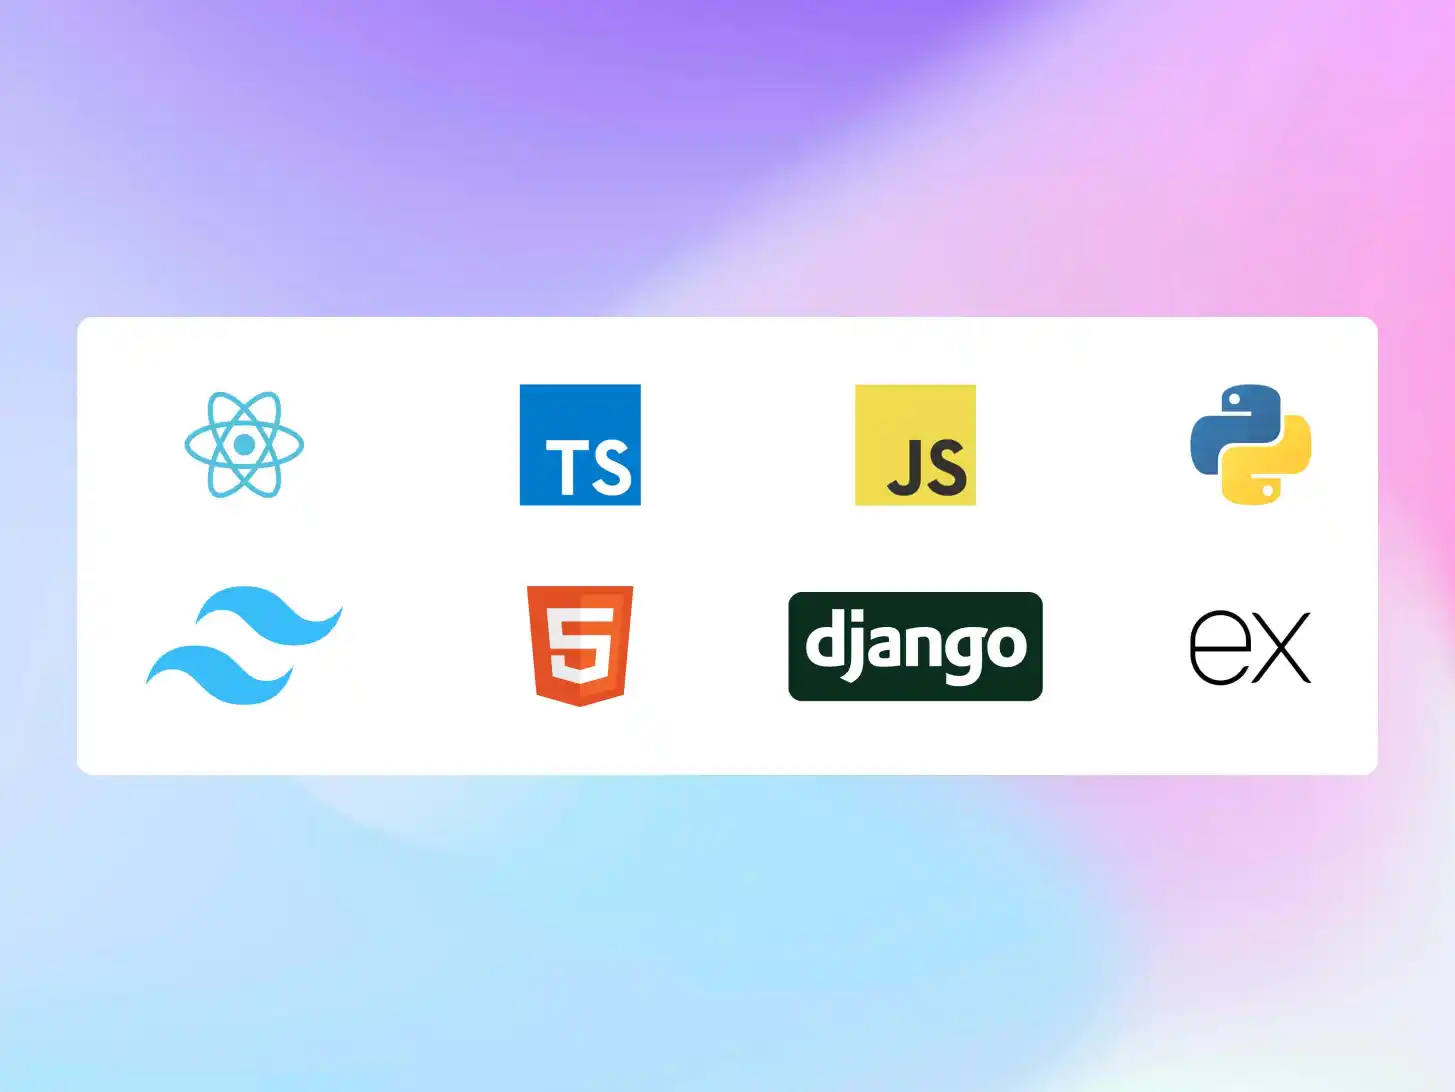 An image of the various programming languages (JavaScript, TypeScript, Python, HTML) and frameworks (Django, React, TailwindCSS, ExpressJS) you can try on Codebase Mentor.